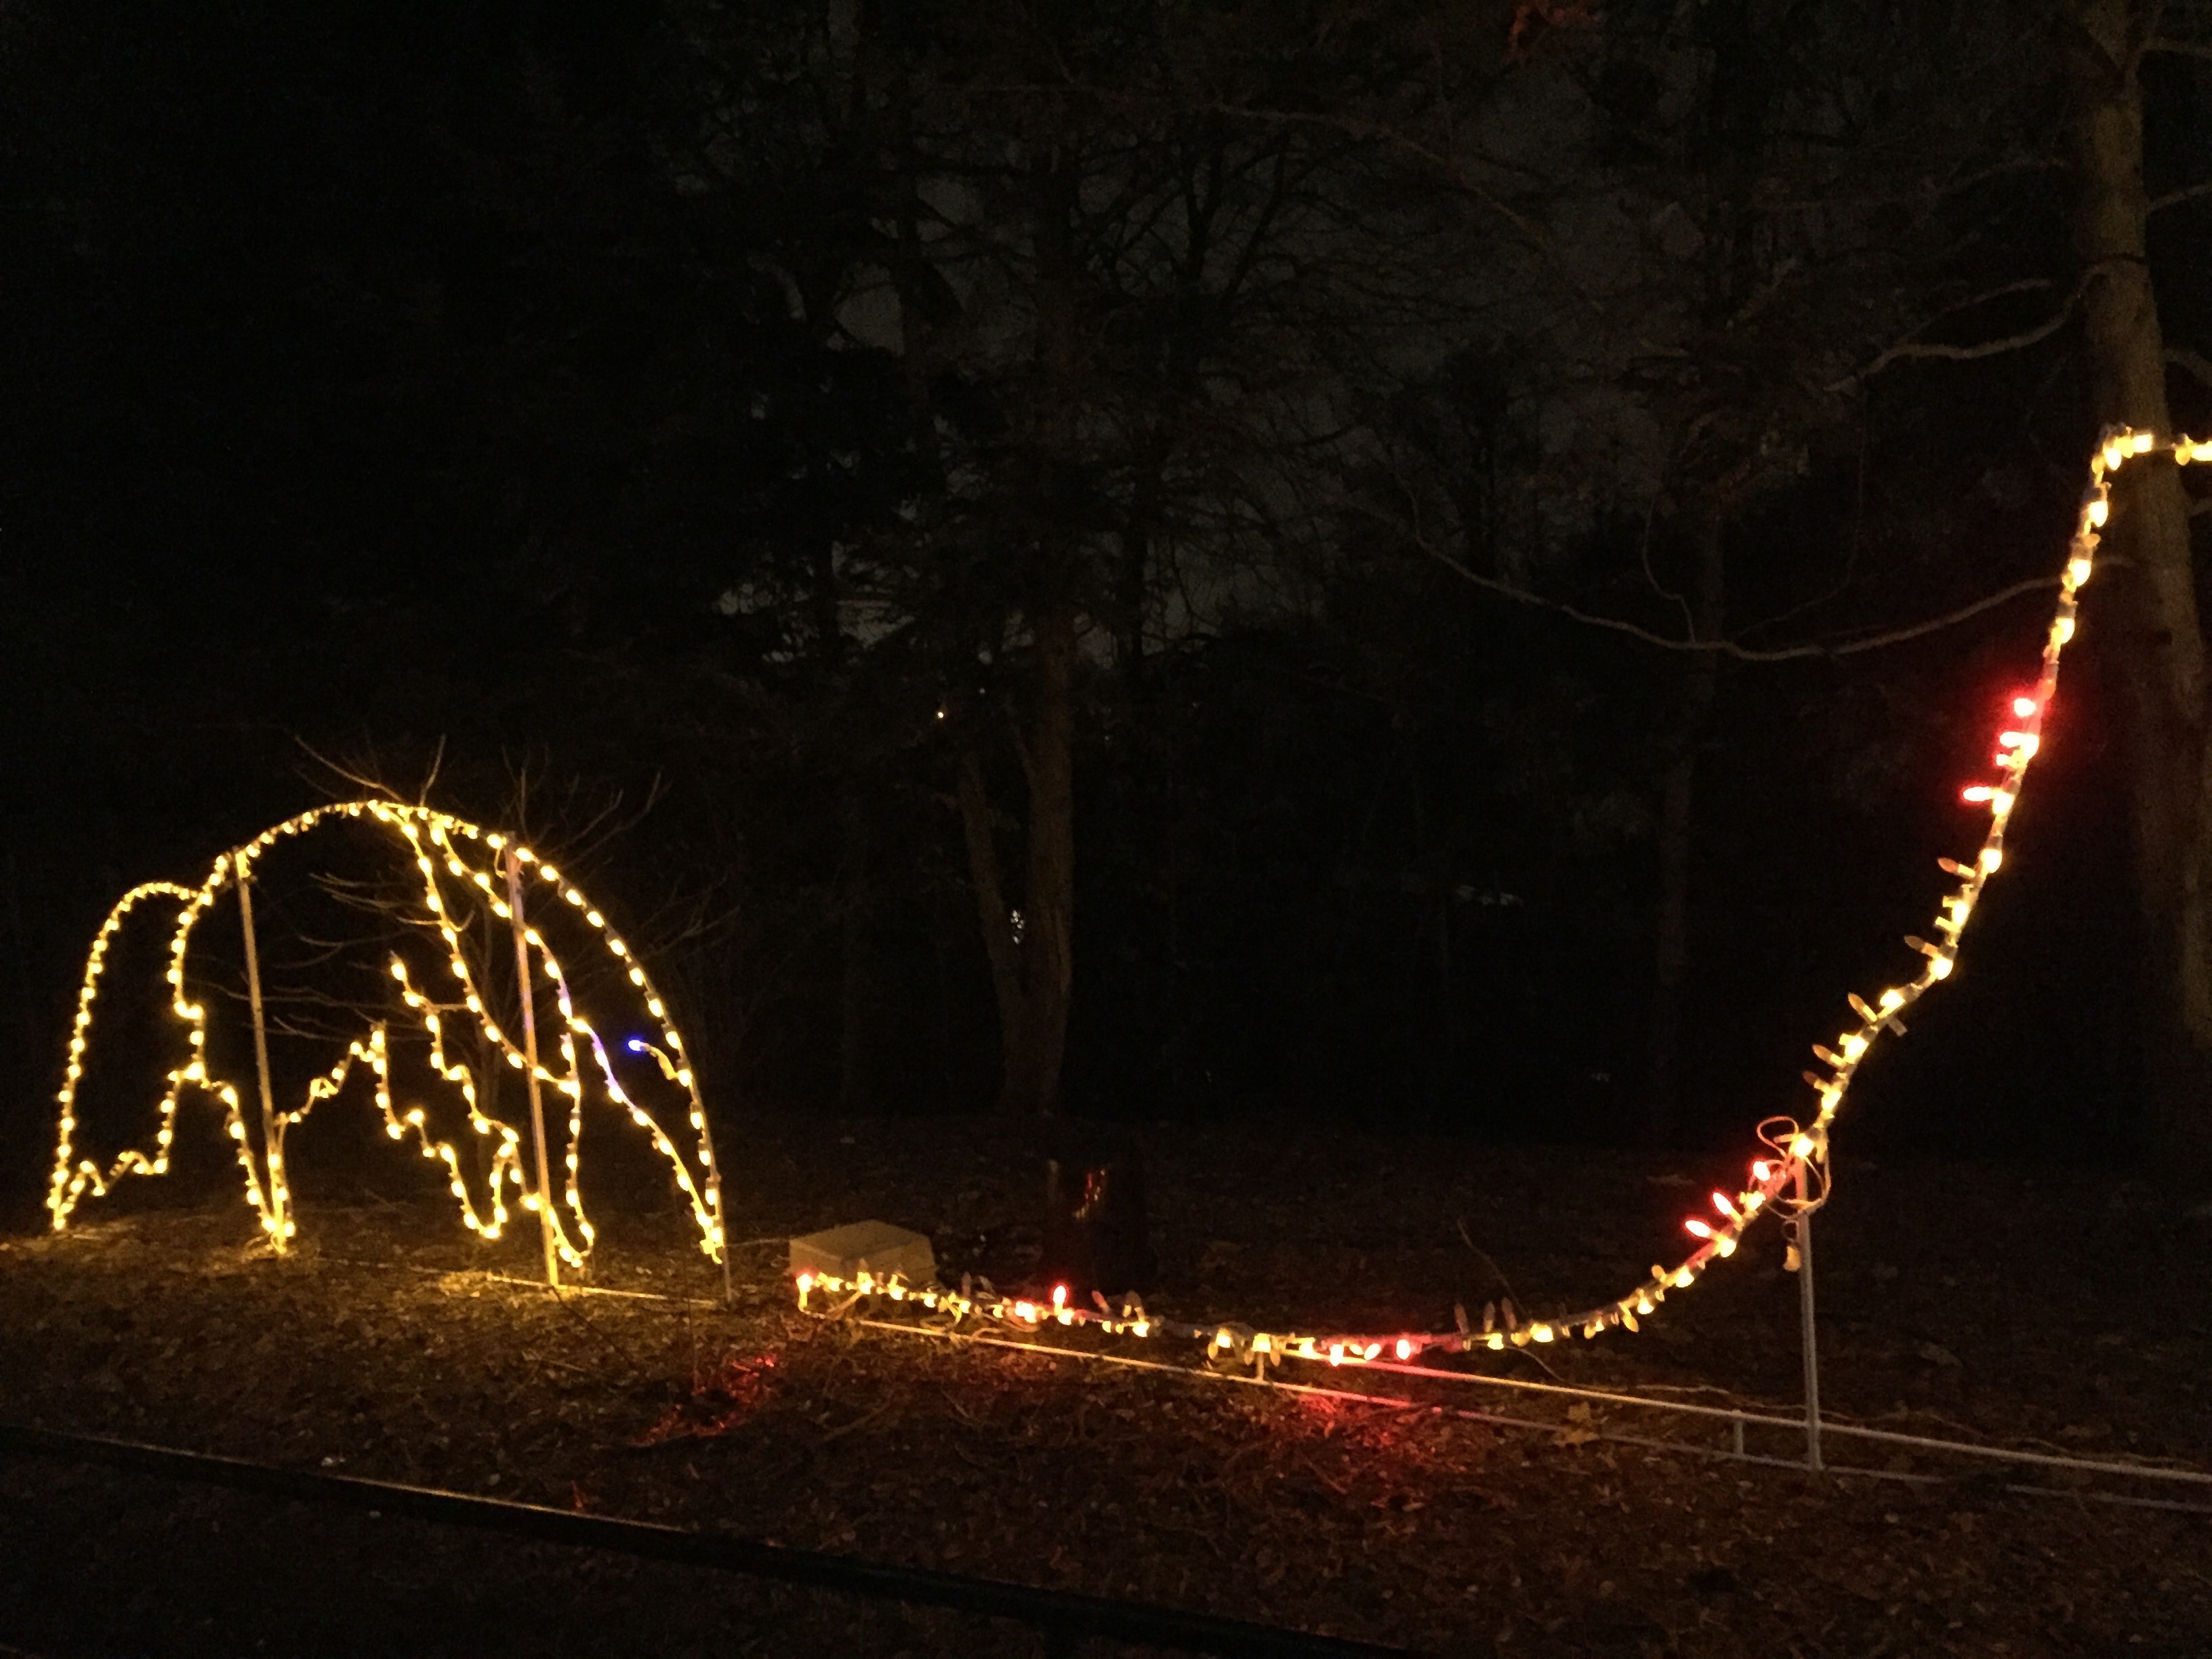 Anteater Zoolights